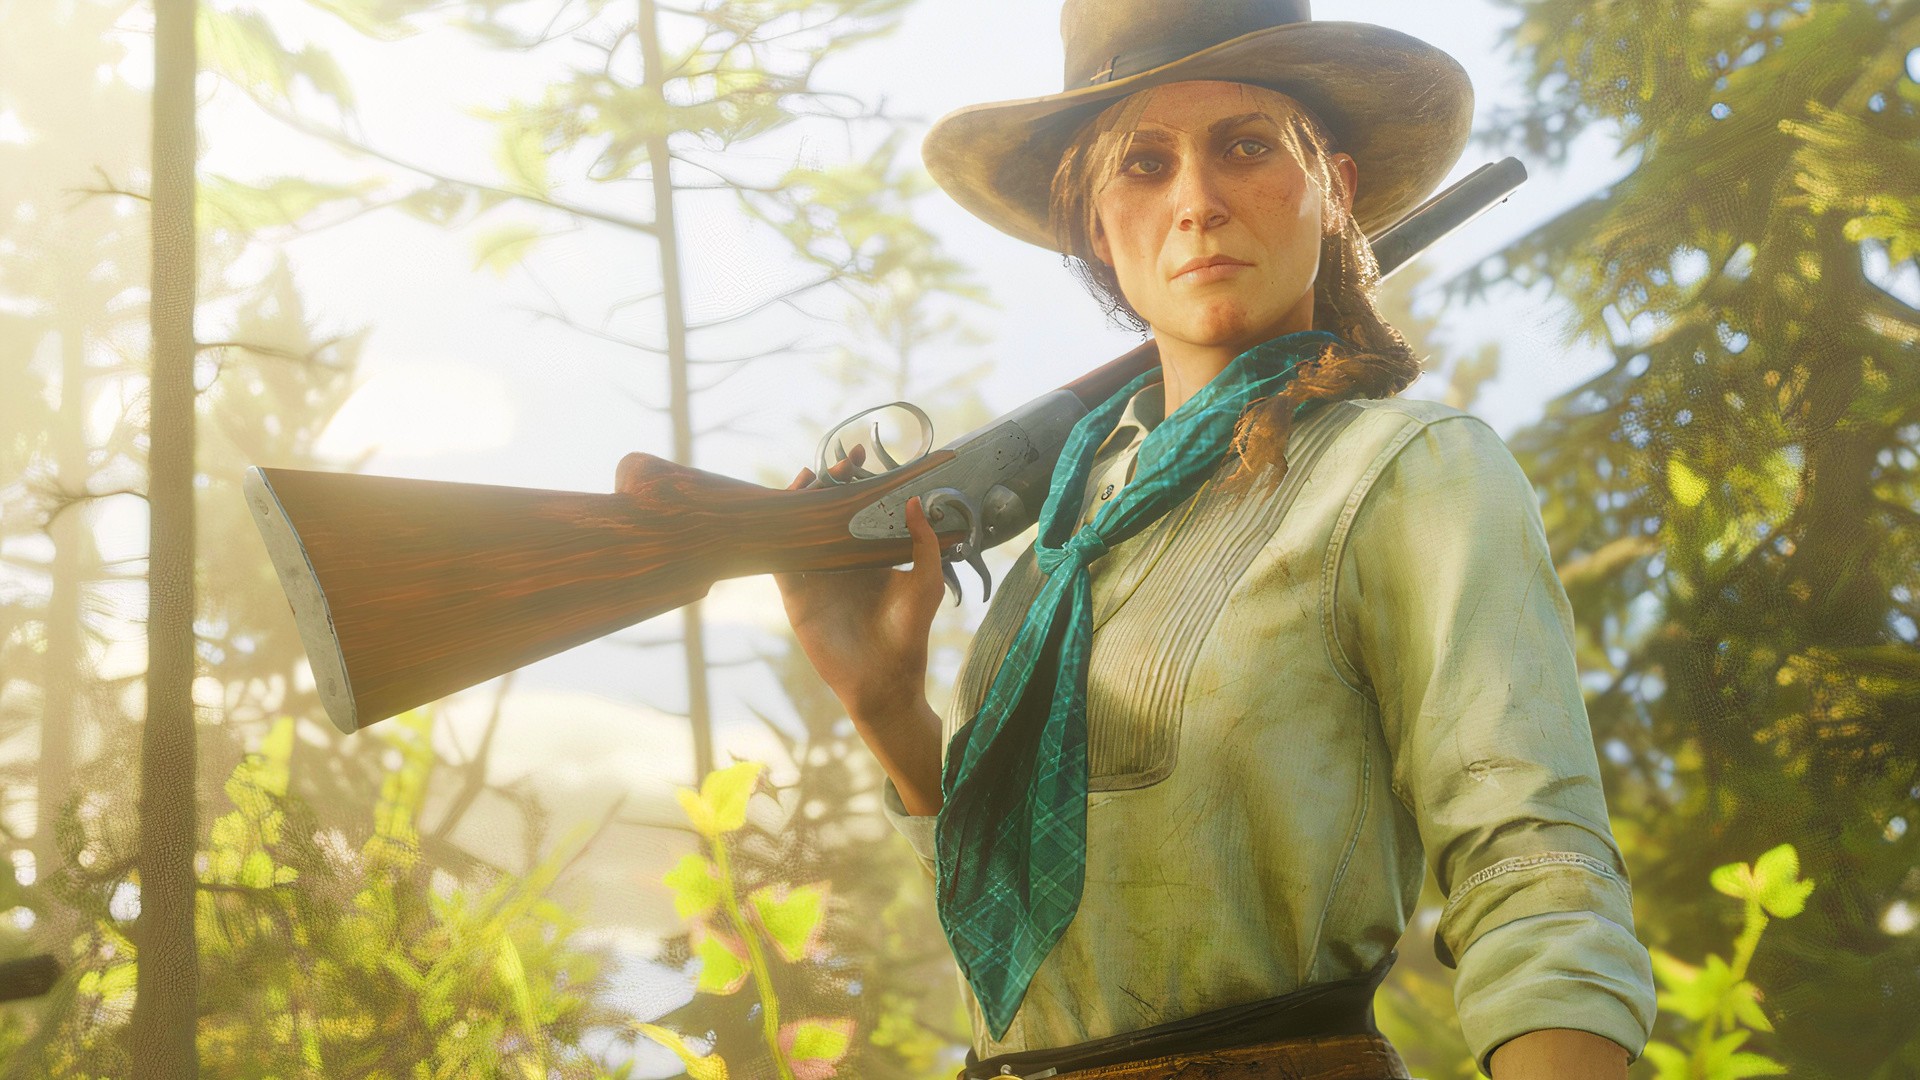 Red Redemption 2 cut content hints at missions canned by Rockstar | PCGamesN